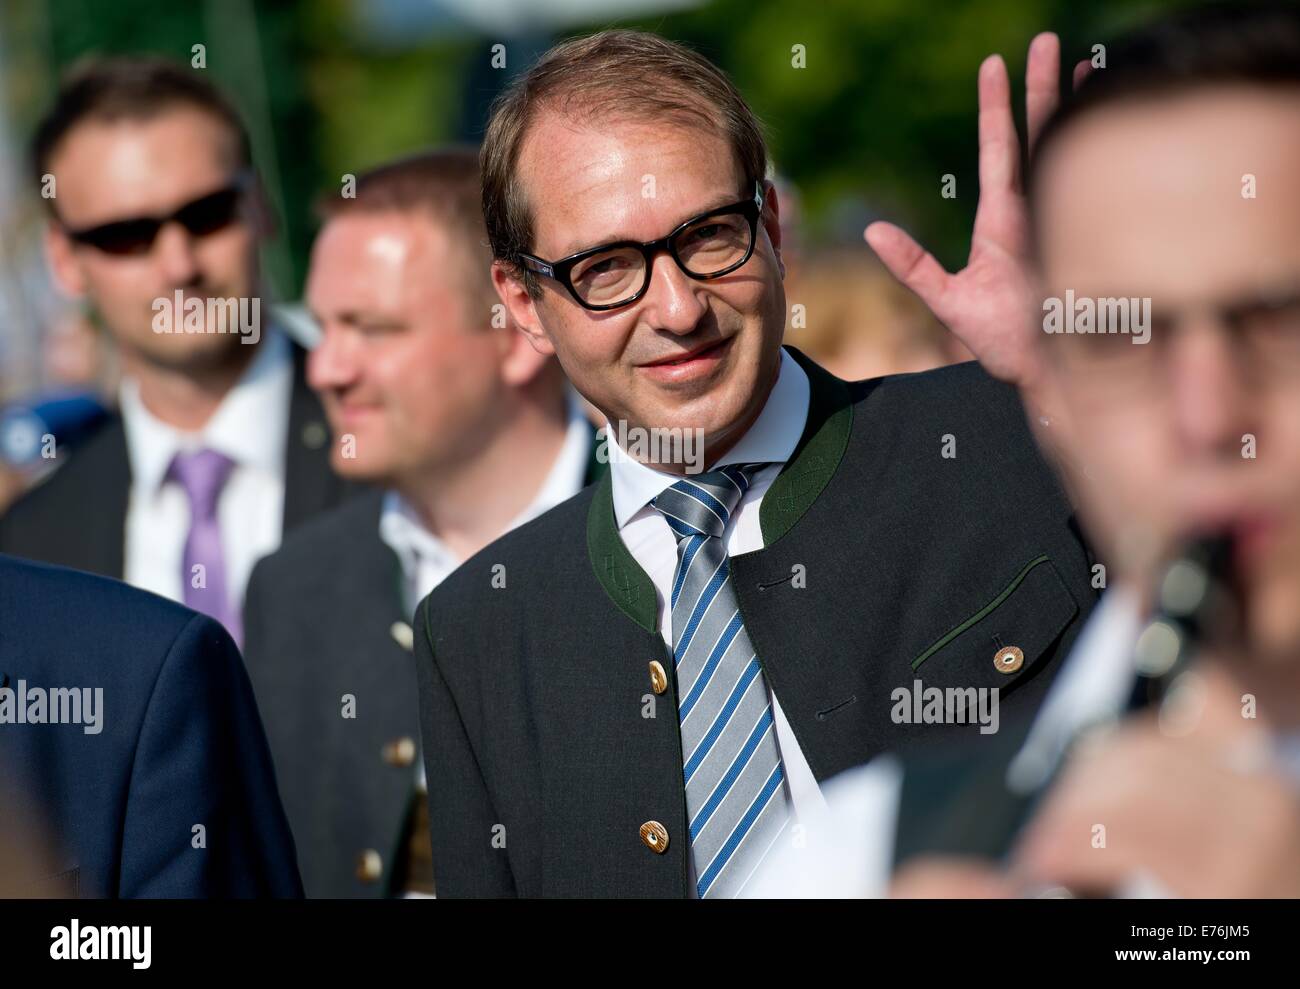 German Minister of Transport and Digital Infrastructure Alexander Dobrindt (CSU) greets accompanied by a band at the fairground of the political 'Gillamoos-Fruehschoppen' in Abensberg (Bavaria), Germany, 08 September 2014. The 'Gillamoos' is one of the biggest and oldest fairs in Lower Bavaria and traditionally hosts a vivid exchange of words between the political parties. PHOTO: SVEN HOPPE/dpa Stock Photo